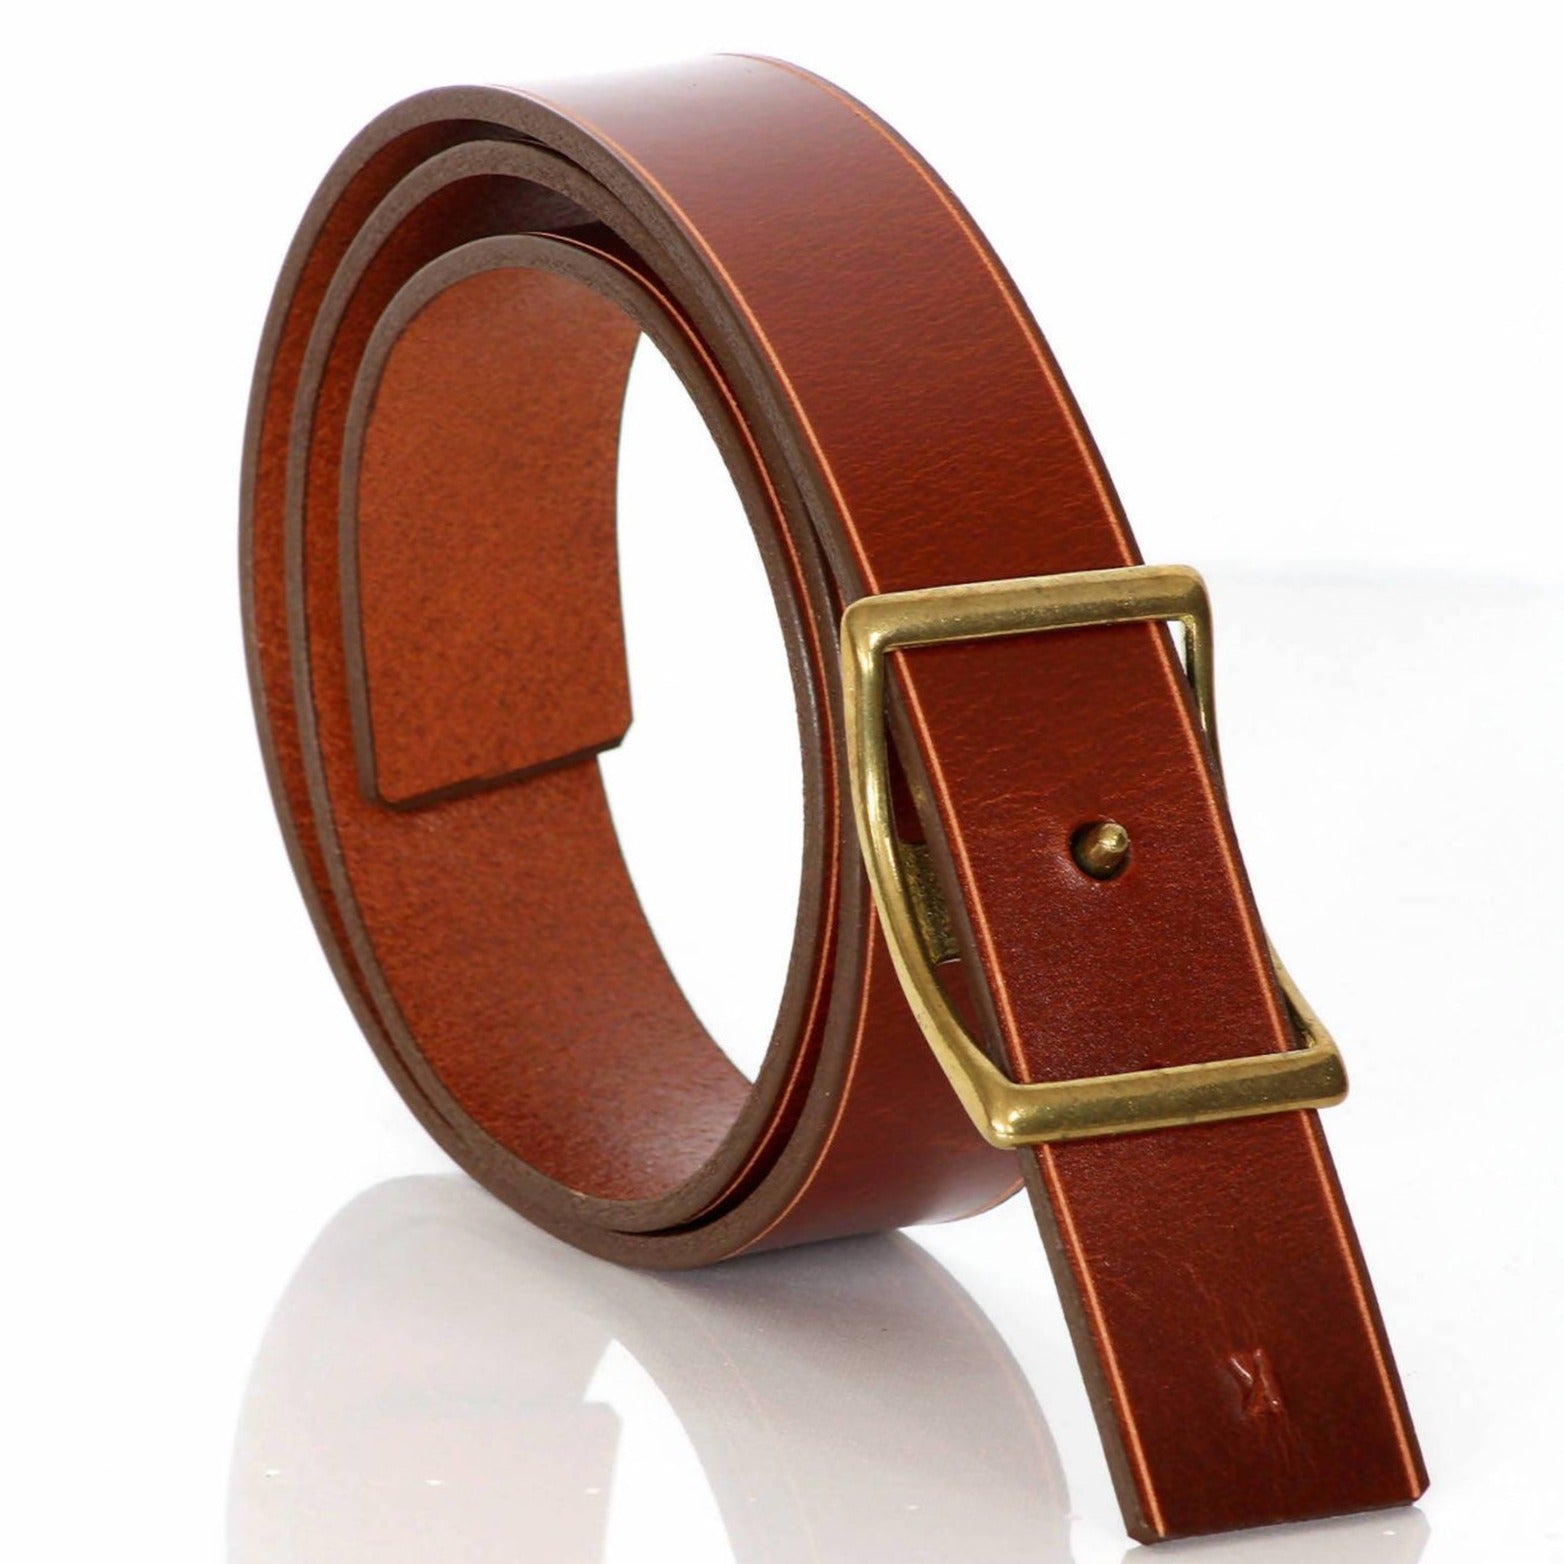 solid brass Conway buckle handmade in Canada Montreal brown leather belt thick sustainable leather Made in Montreal Canada quebec by Designer Kim Fletcher